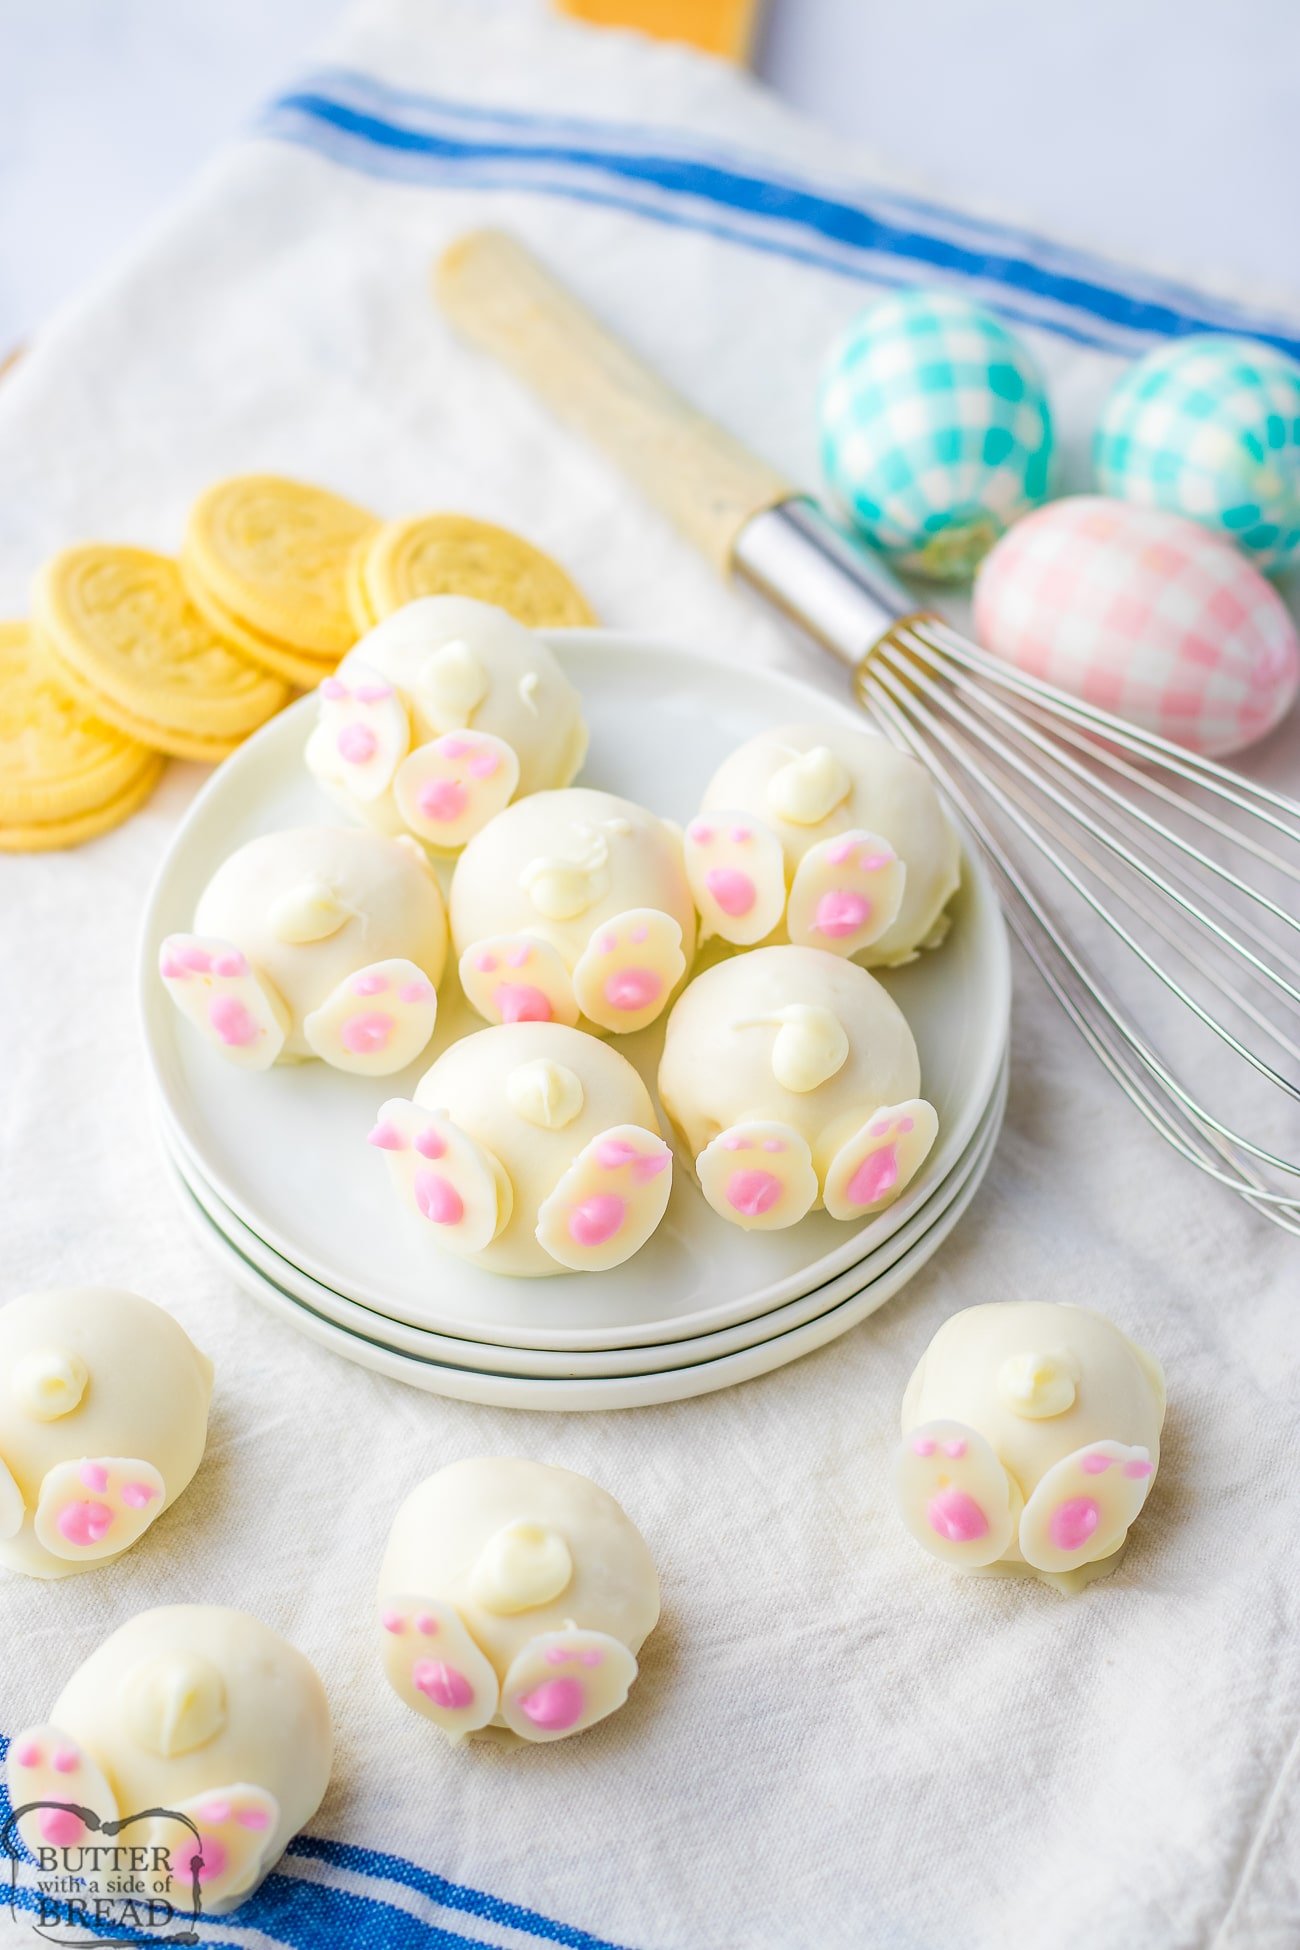 Lemon oreo cookies blended with cream cheese dipped in white chocolate to look like bunny butts